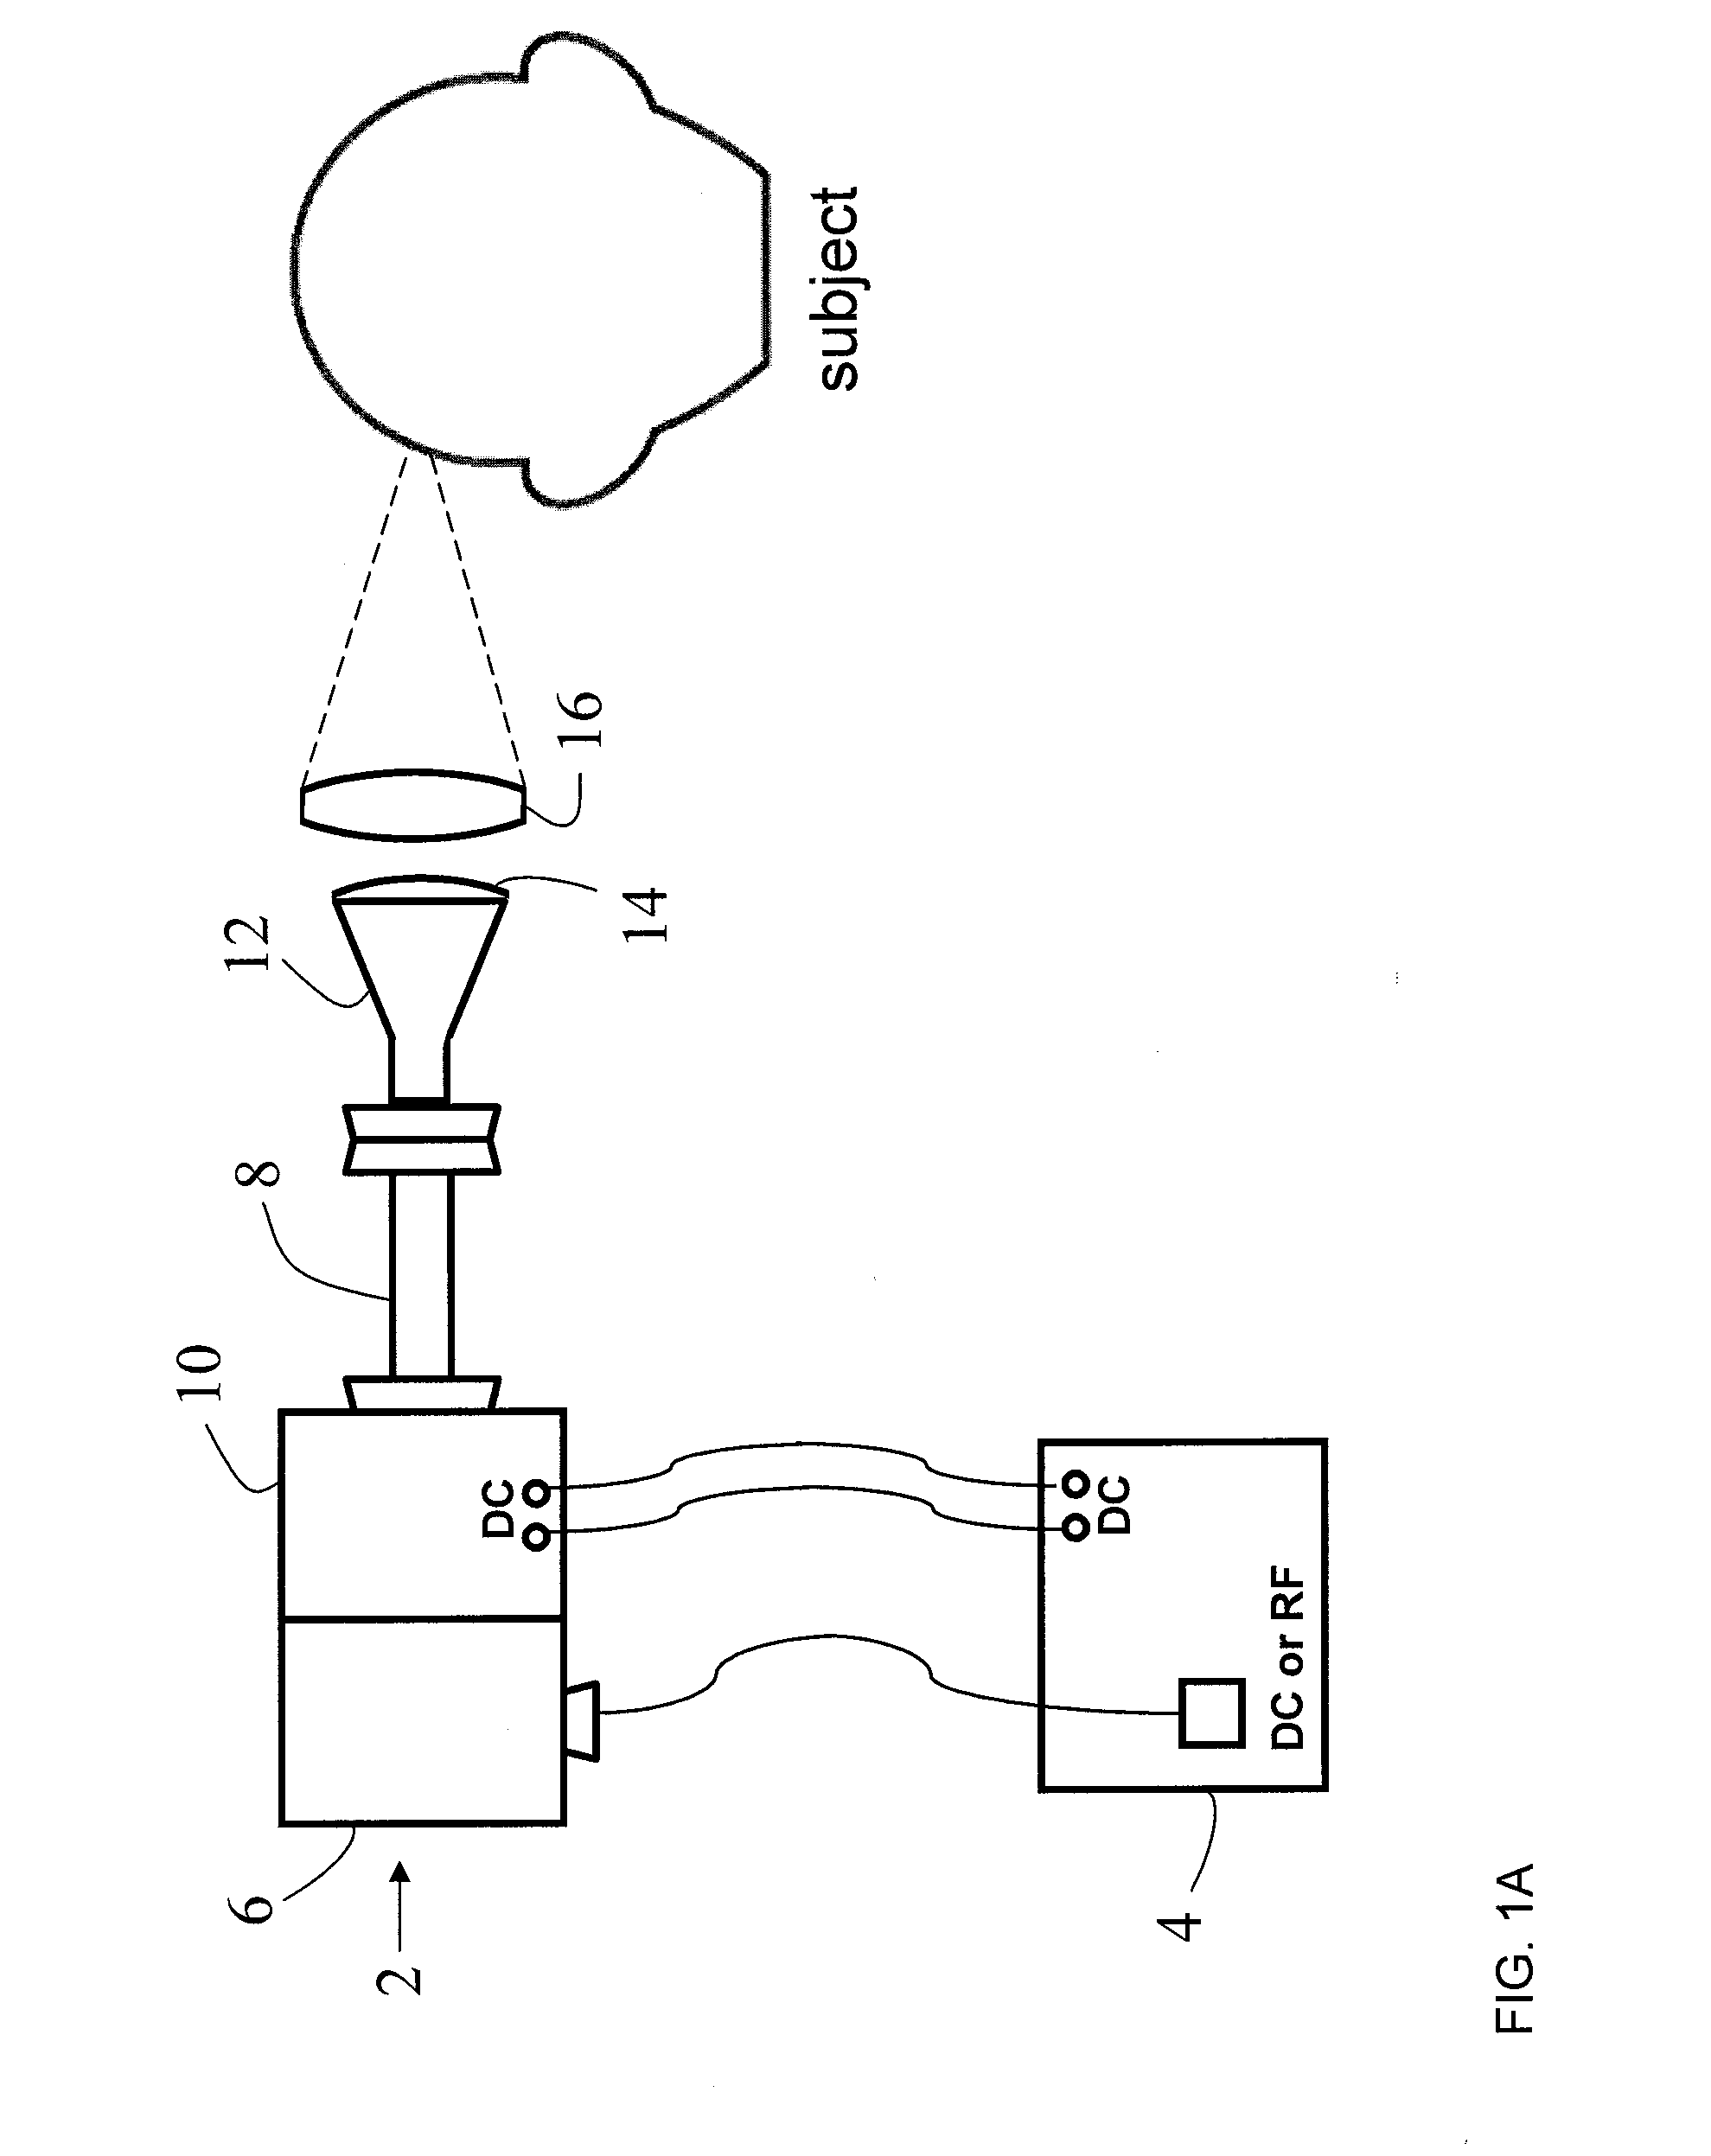 Systems and Methods for Diagnostics, Control and Treatment of Neurological Functions and Disorders by Exposure to Electromagnetic Waves